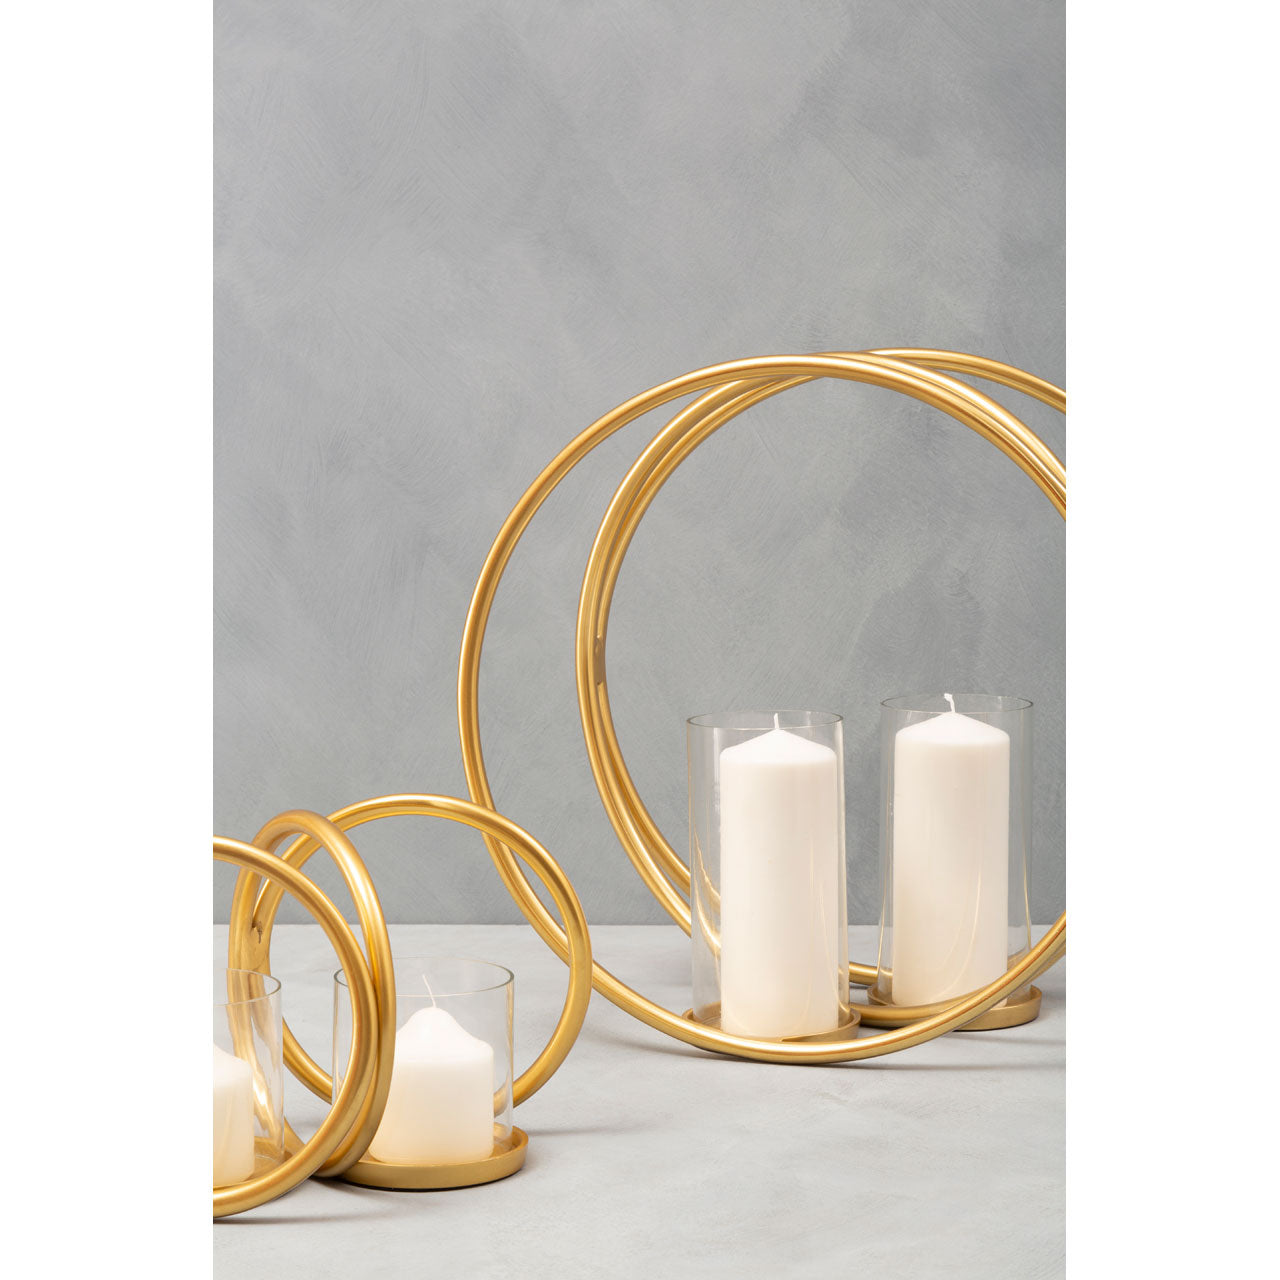  Premier-Olivia's Boutique Hotel Collection - Double Ring Gold Candle Holder-Gold 909 